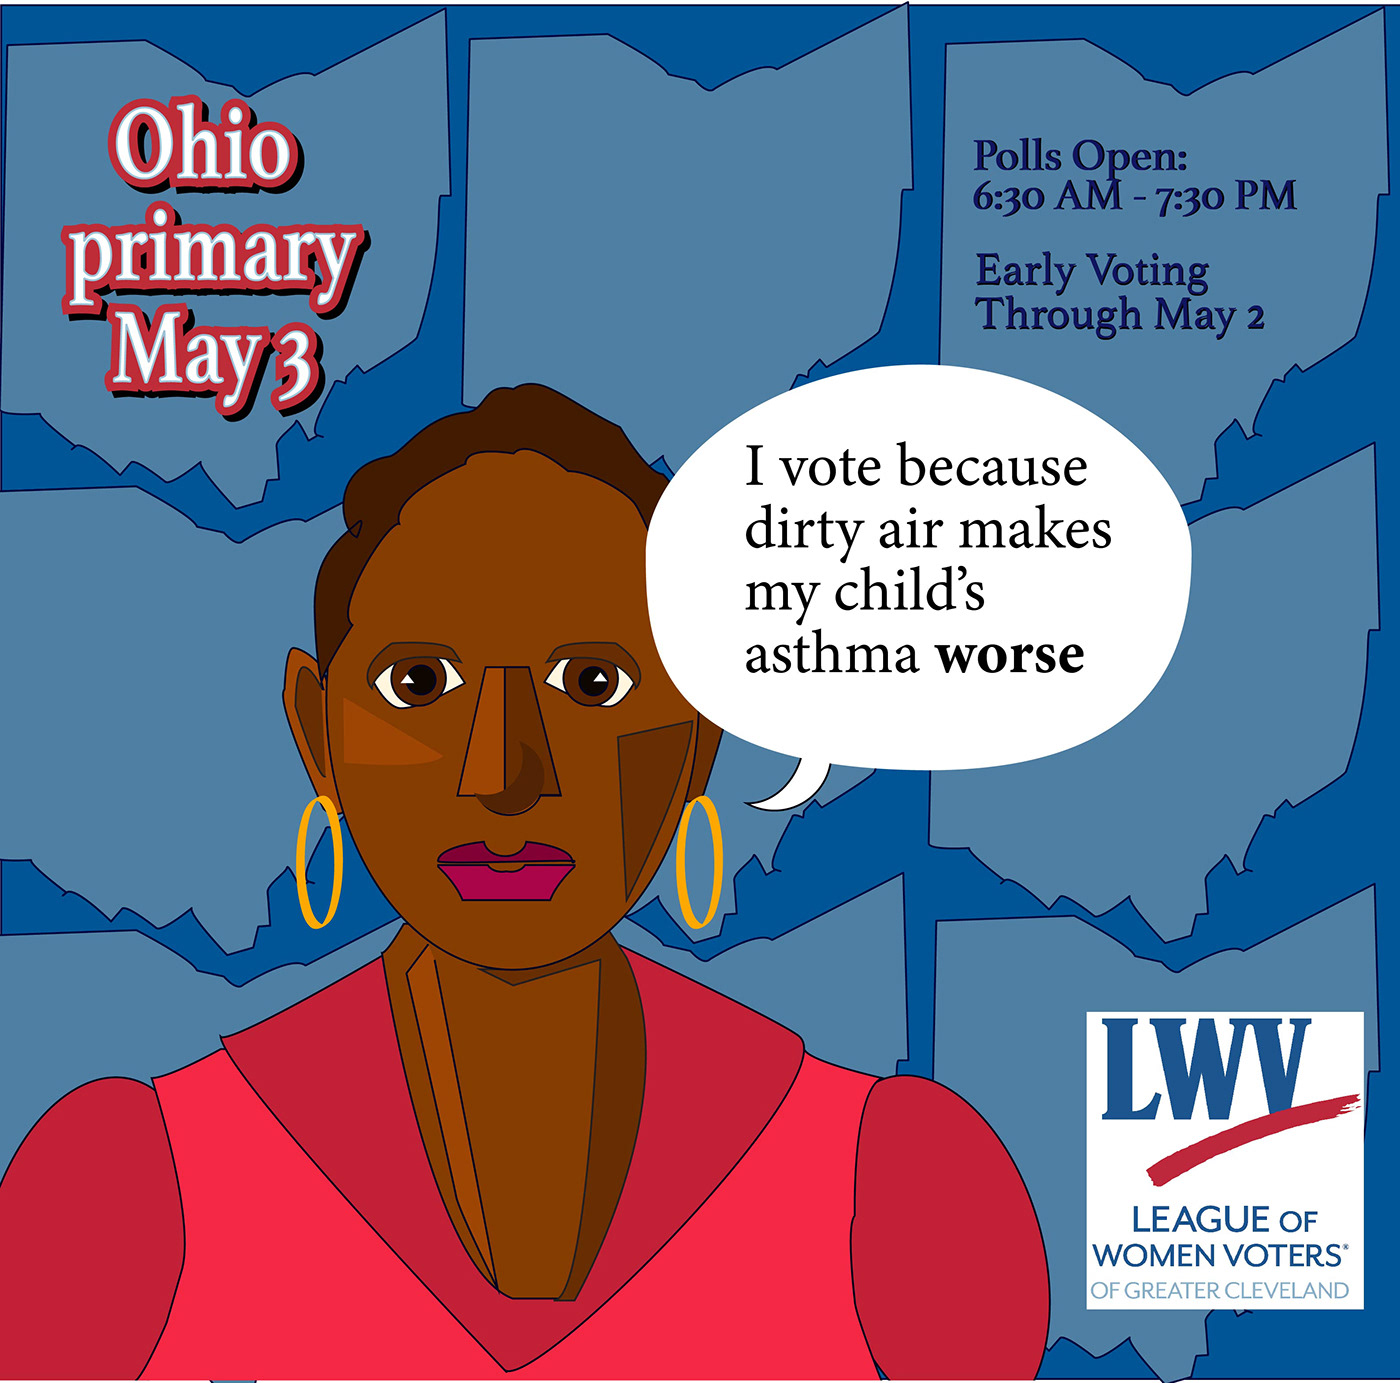 A woman is seen urging people to vote in the Ohio primary
